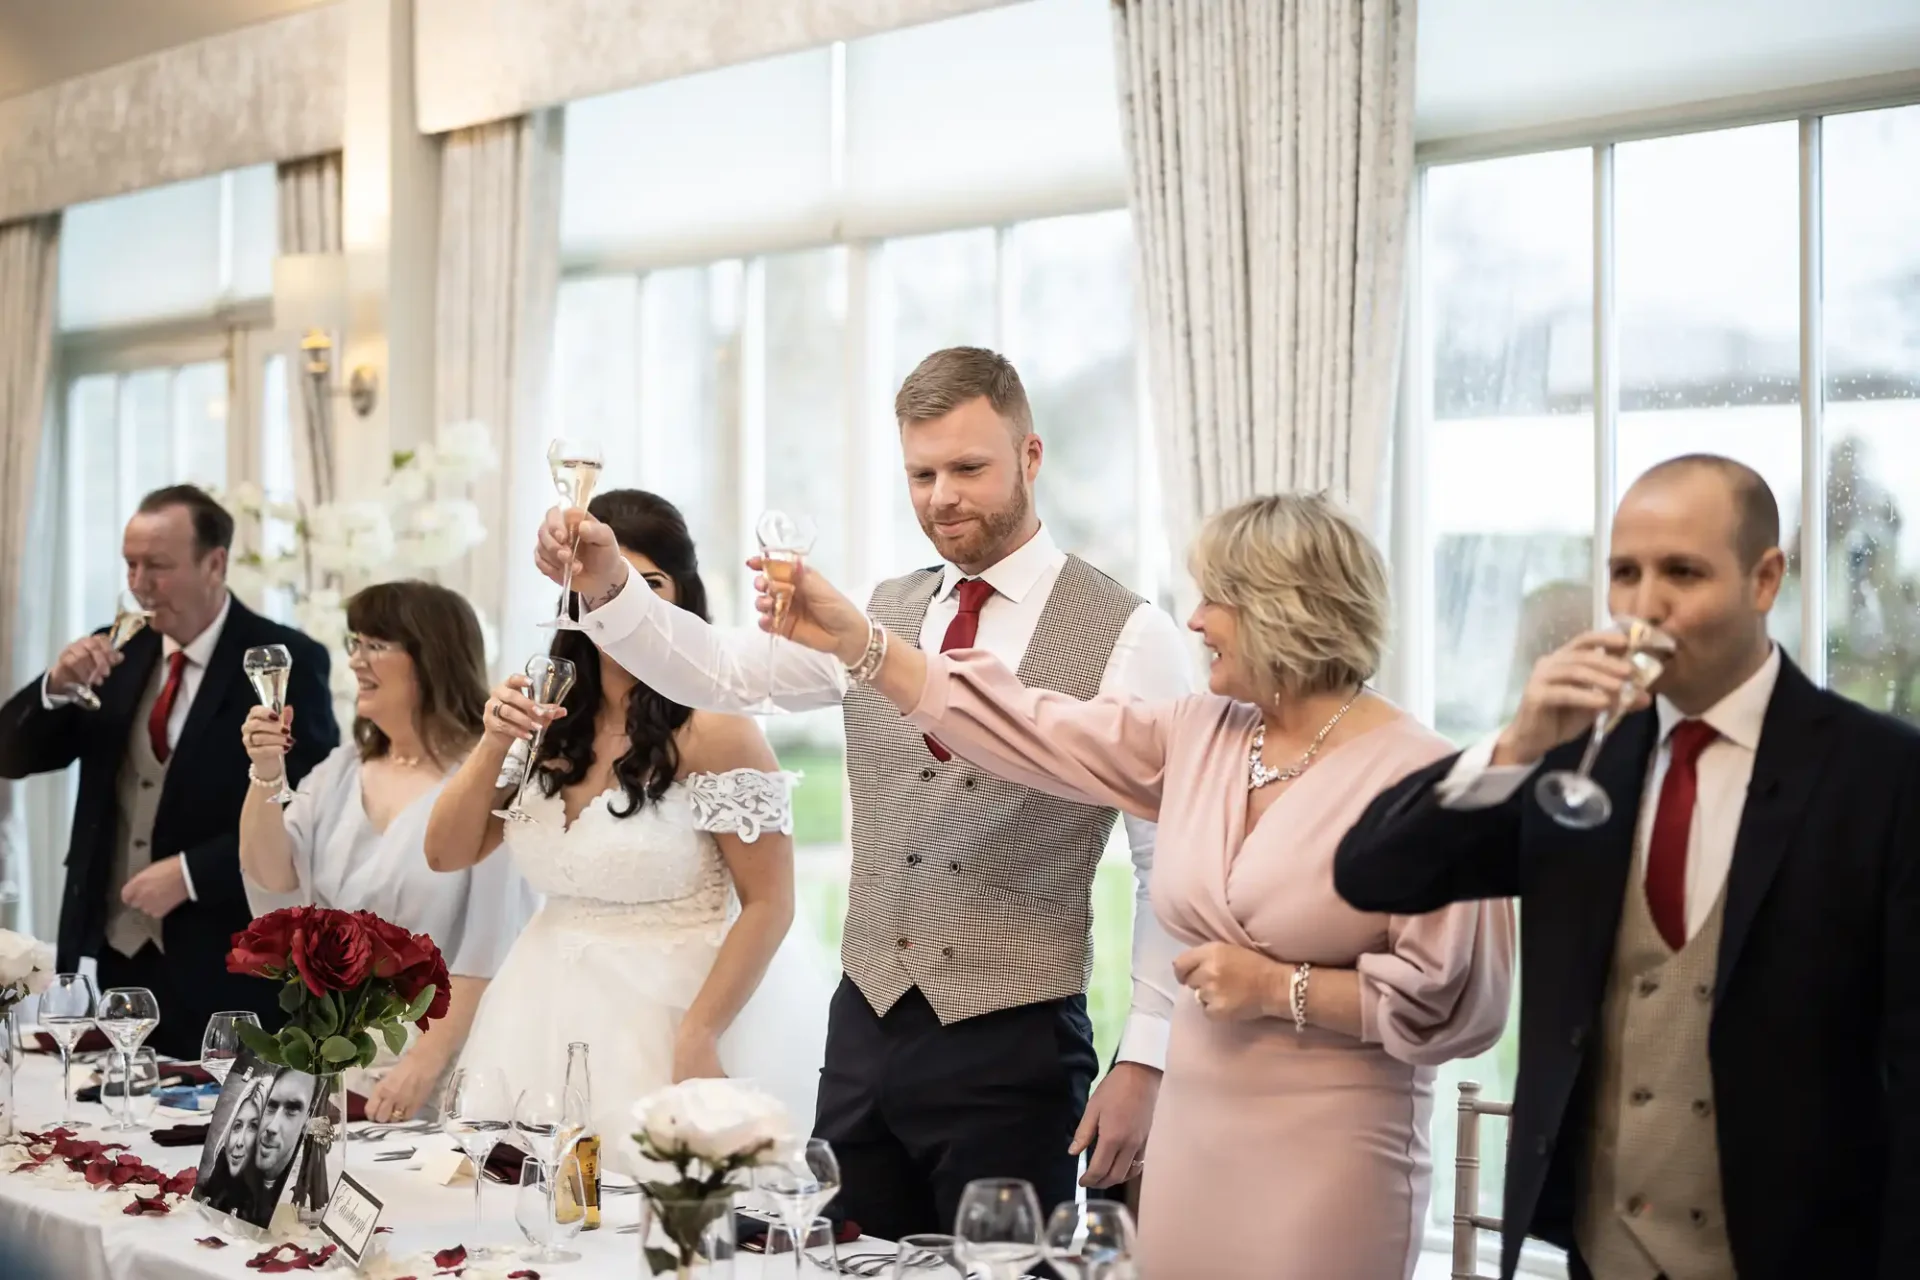 A wedding toast inside a banquet hall, where a groom and several guests raise glasses with a window view background.